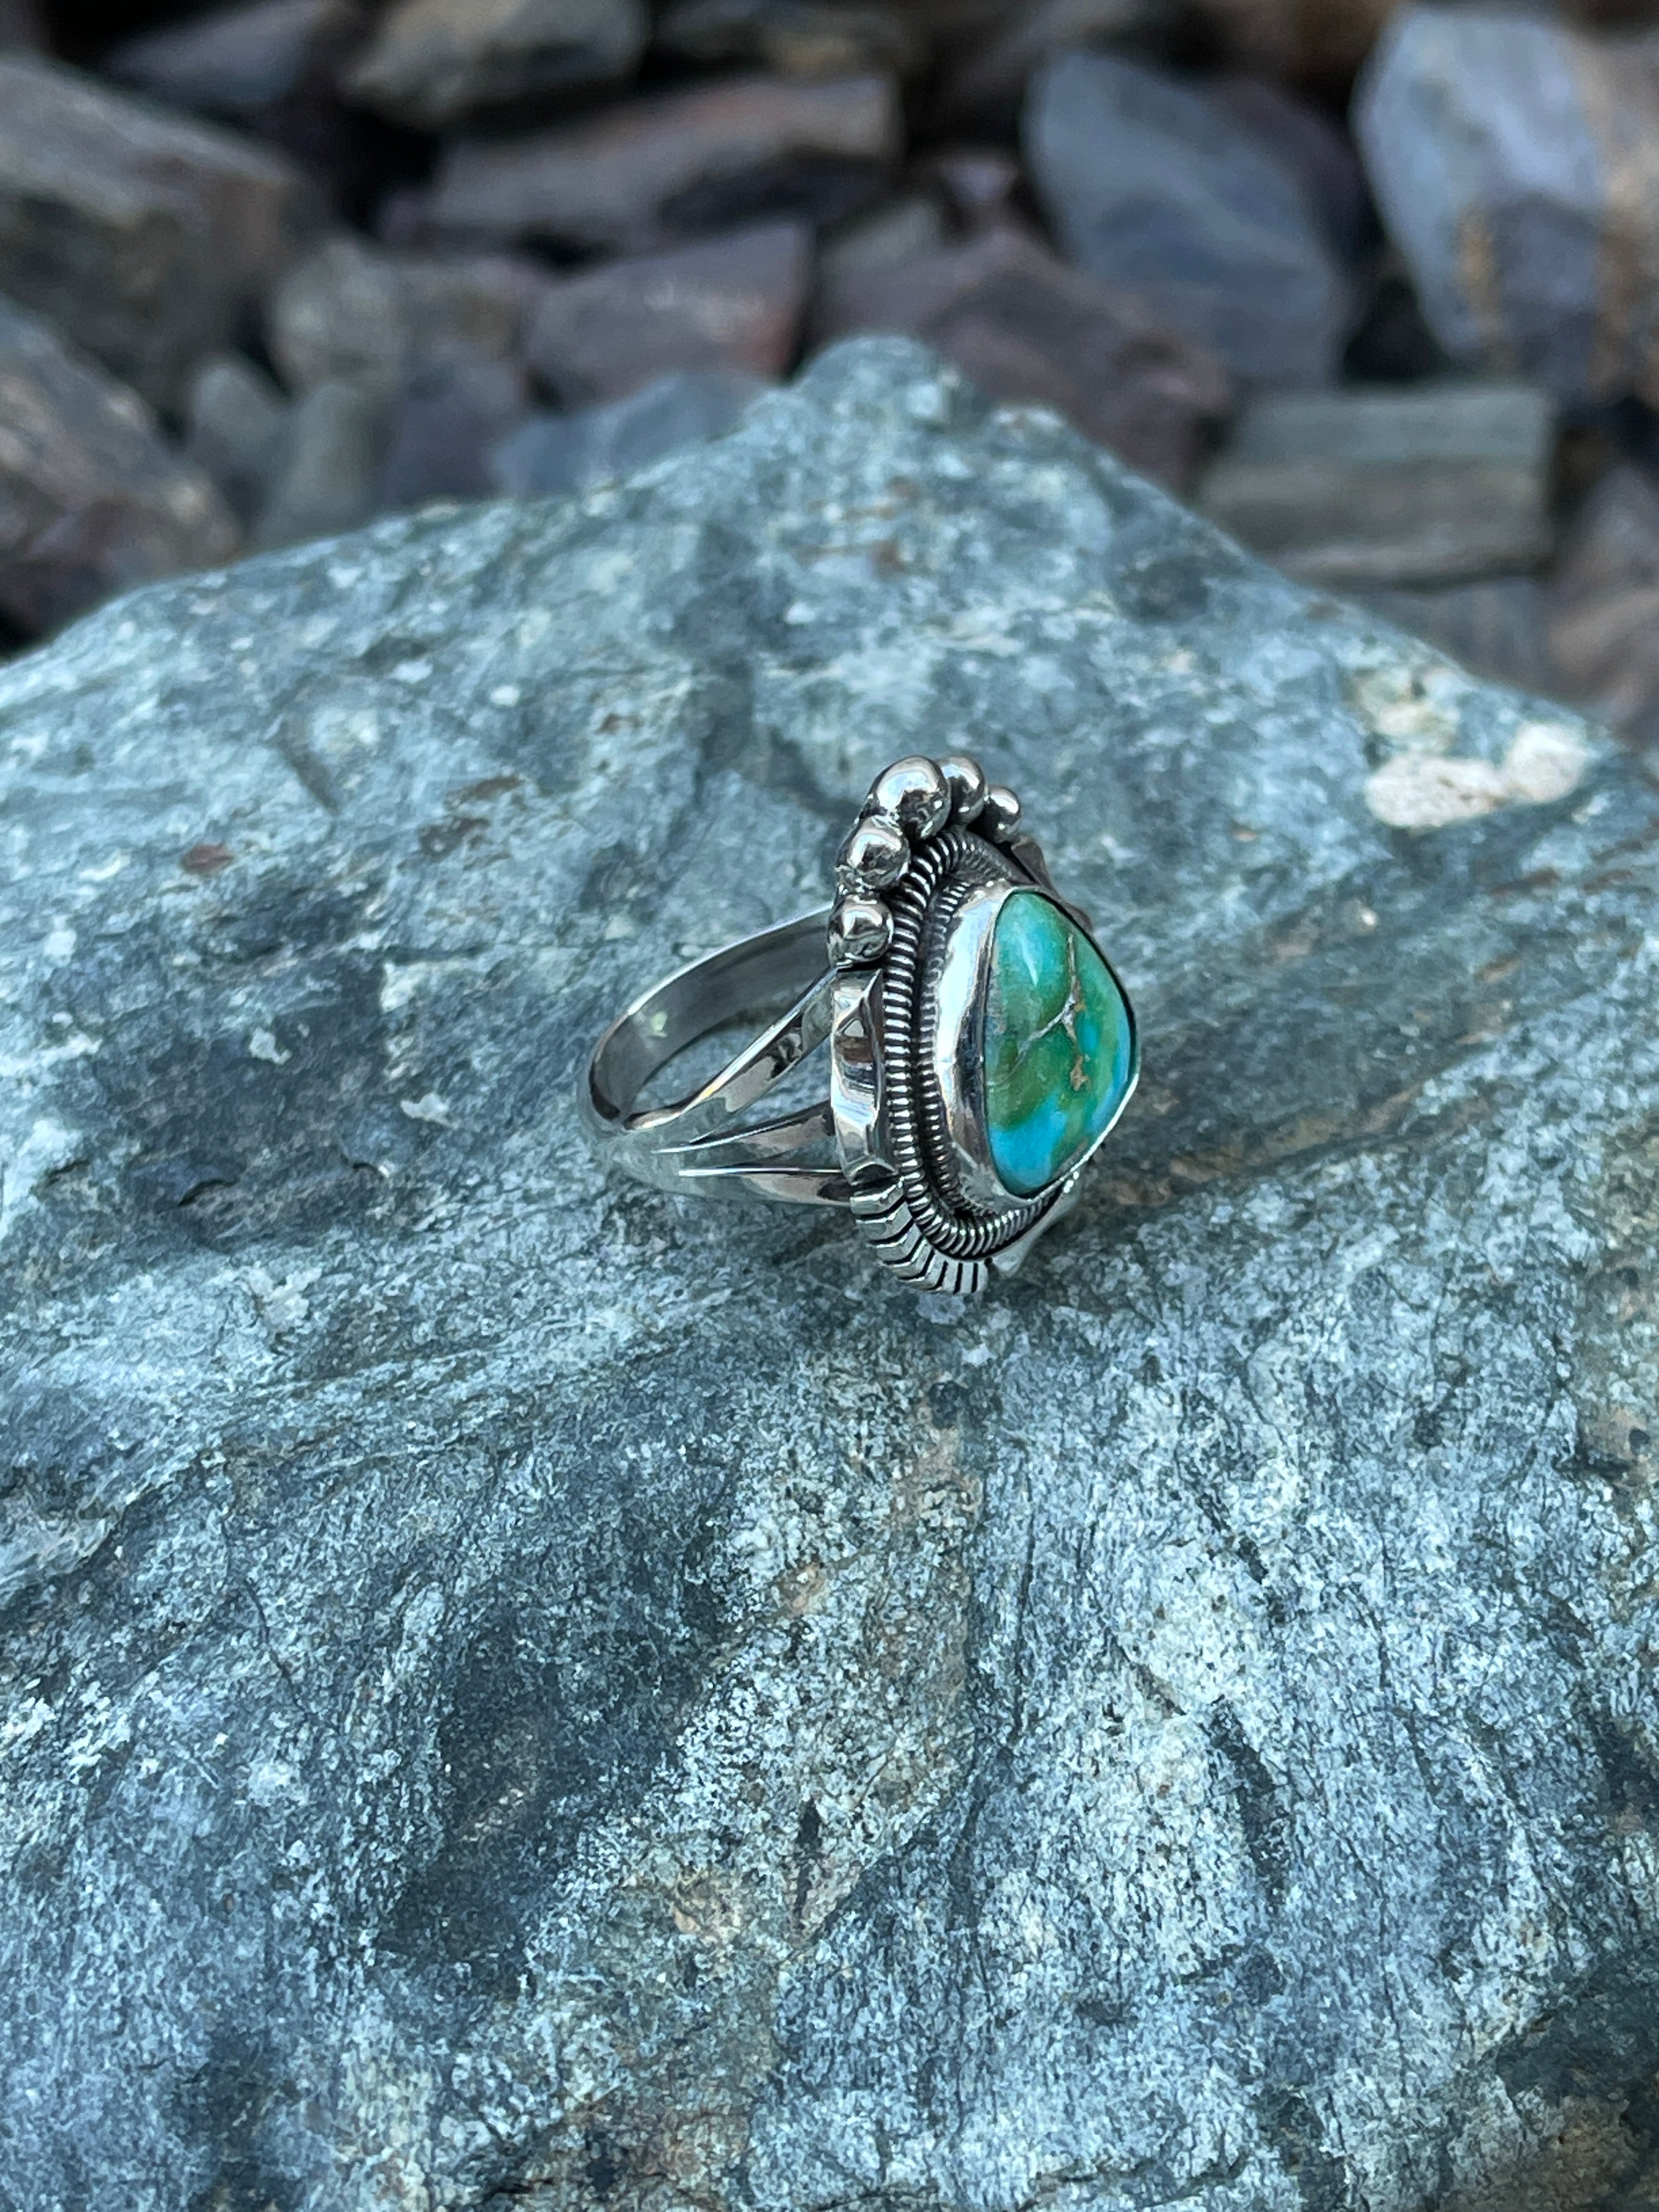 Hand Crafted Sterling Silver Sonoran Gold Turquoise Ring with Coil Detail - Size 6 1/2